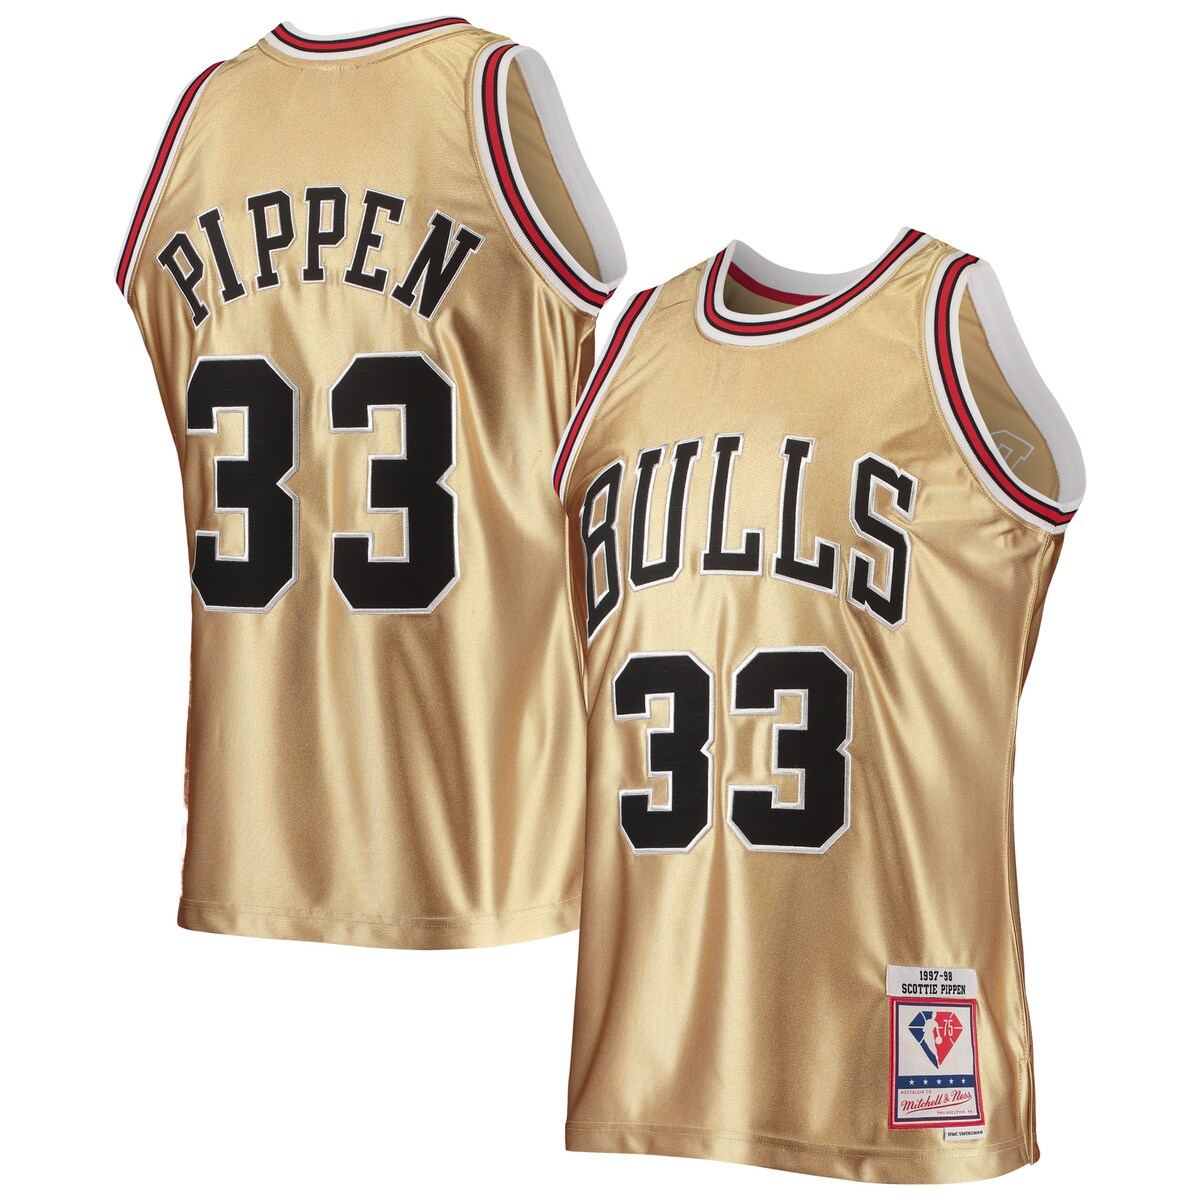 In the 75-year history of the NBA, the Chicago Bulls and Scottie Pippen have both played a major role in that story. This Mitchell & Ness 1997/98 Hardwood Classics Swingman jersey features embroidered graphics for a vintage look, perfect for the next game. The throwback design and mesh fabric pay homage to one of the team's greatest players.Swingman ThrowbackJock tag at bottom left hemEmbroidered fabric appliquesImportedMaterial: 100% PolyesterSide splits at hemBrand: Mitchell & NessSleevelessOfficially licensedMachine wash, line dry